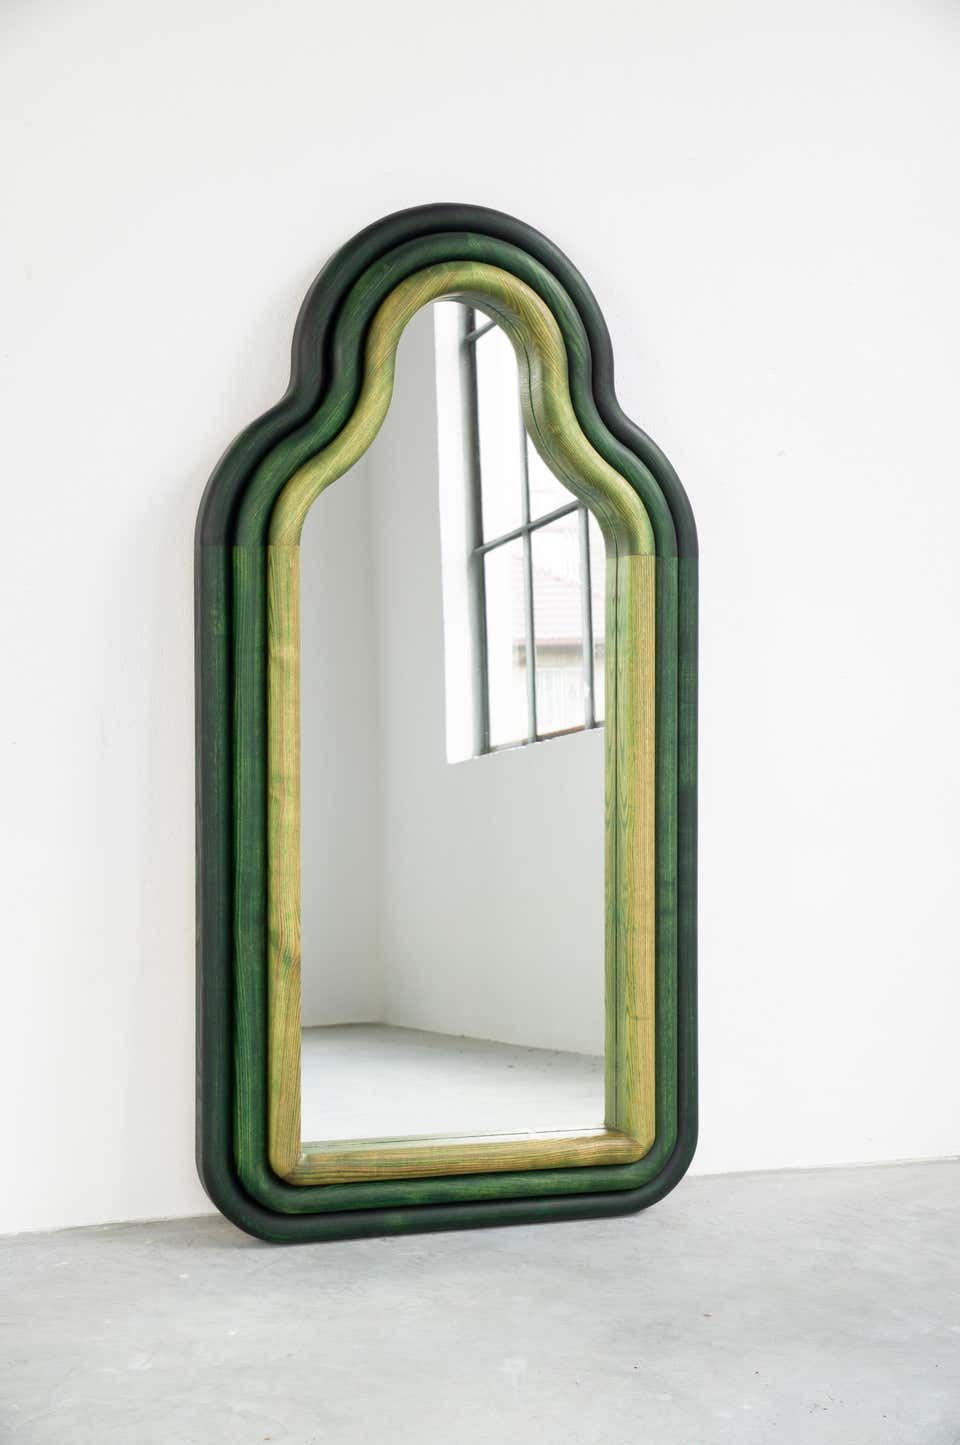 Reflect Your Style: Floor Mirror Designs That Make a Statement